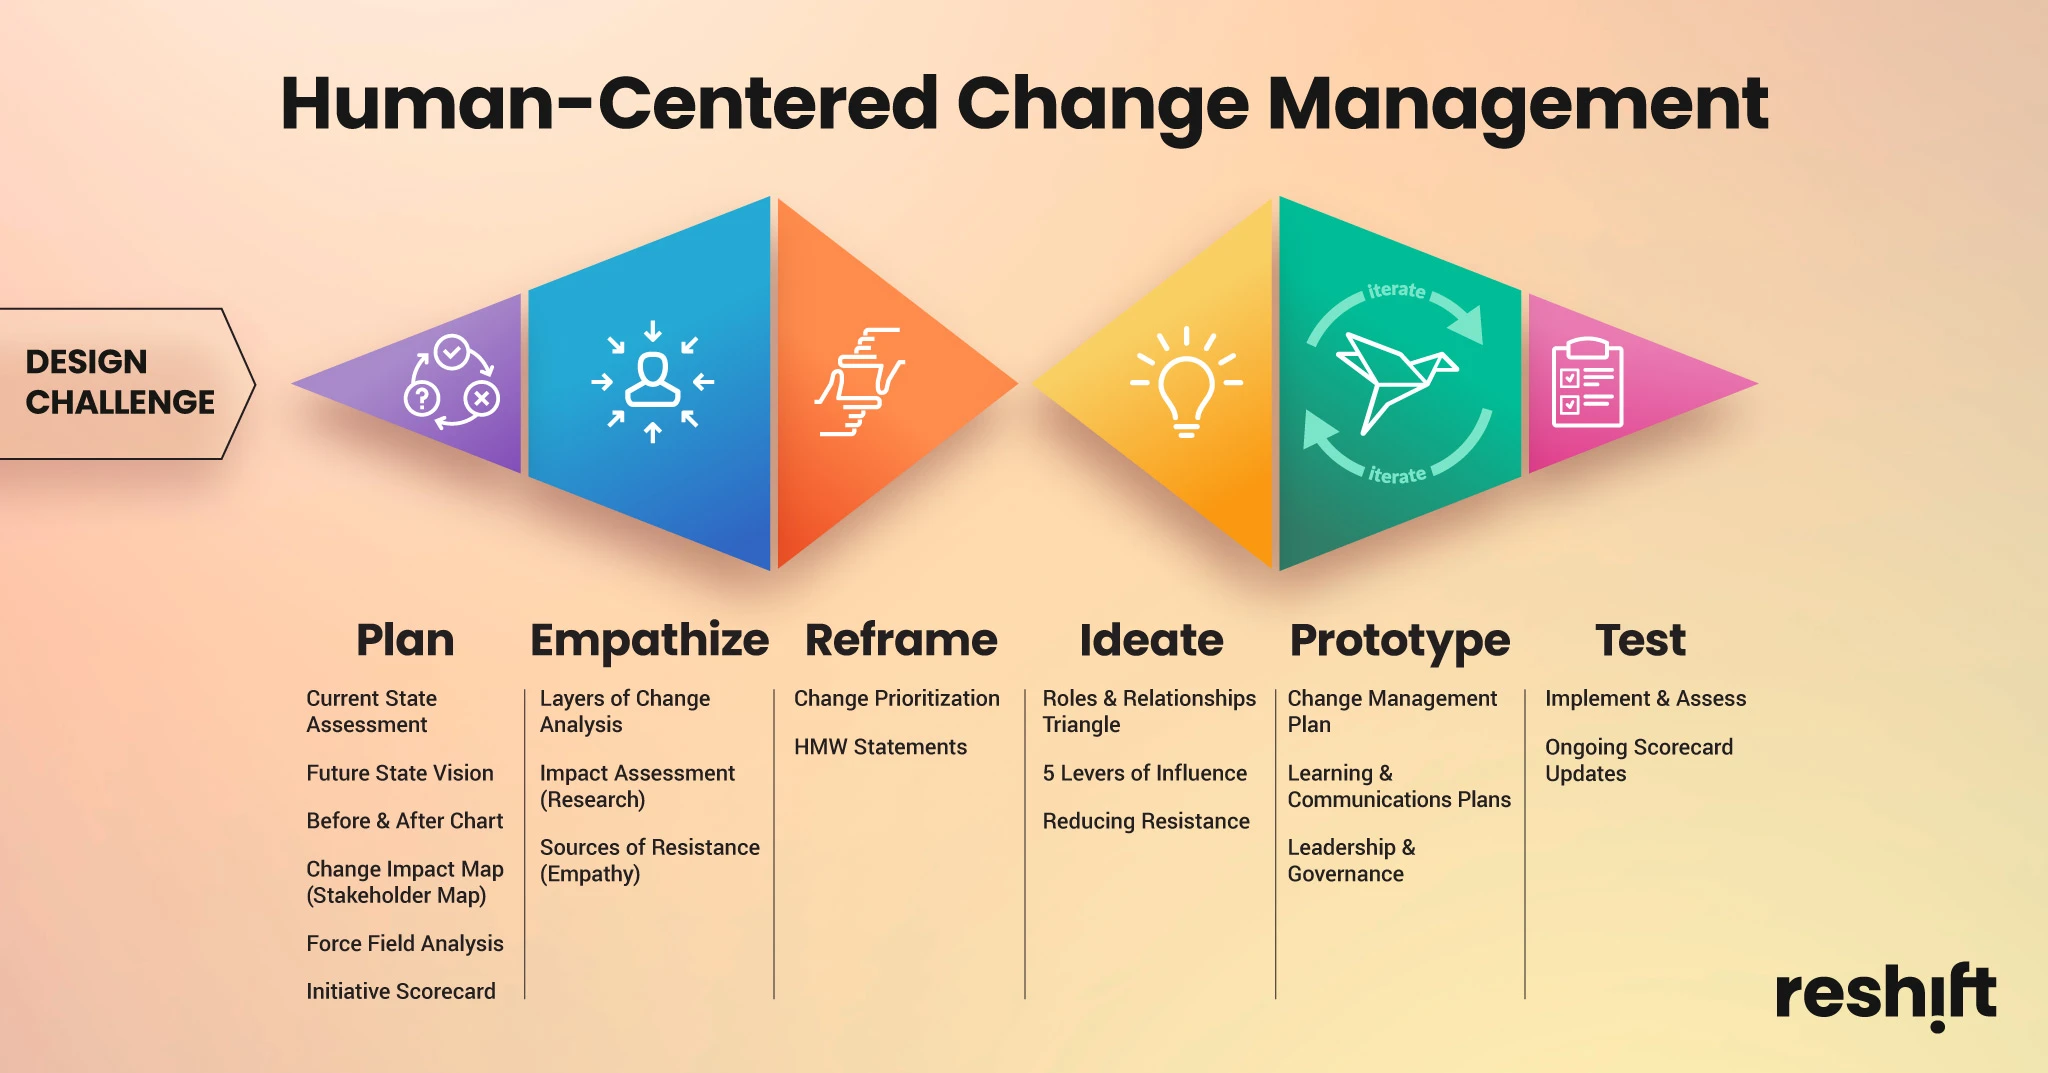 Human-Centered Change Management Follows the Double Diamond